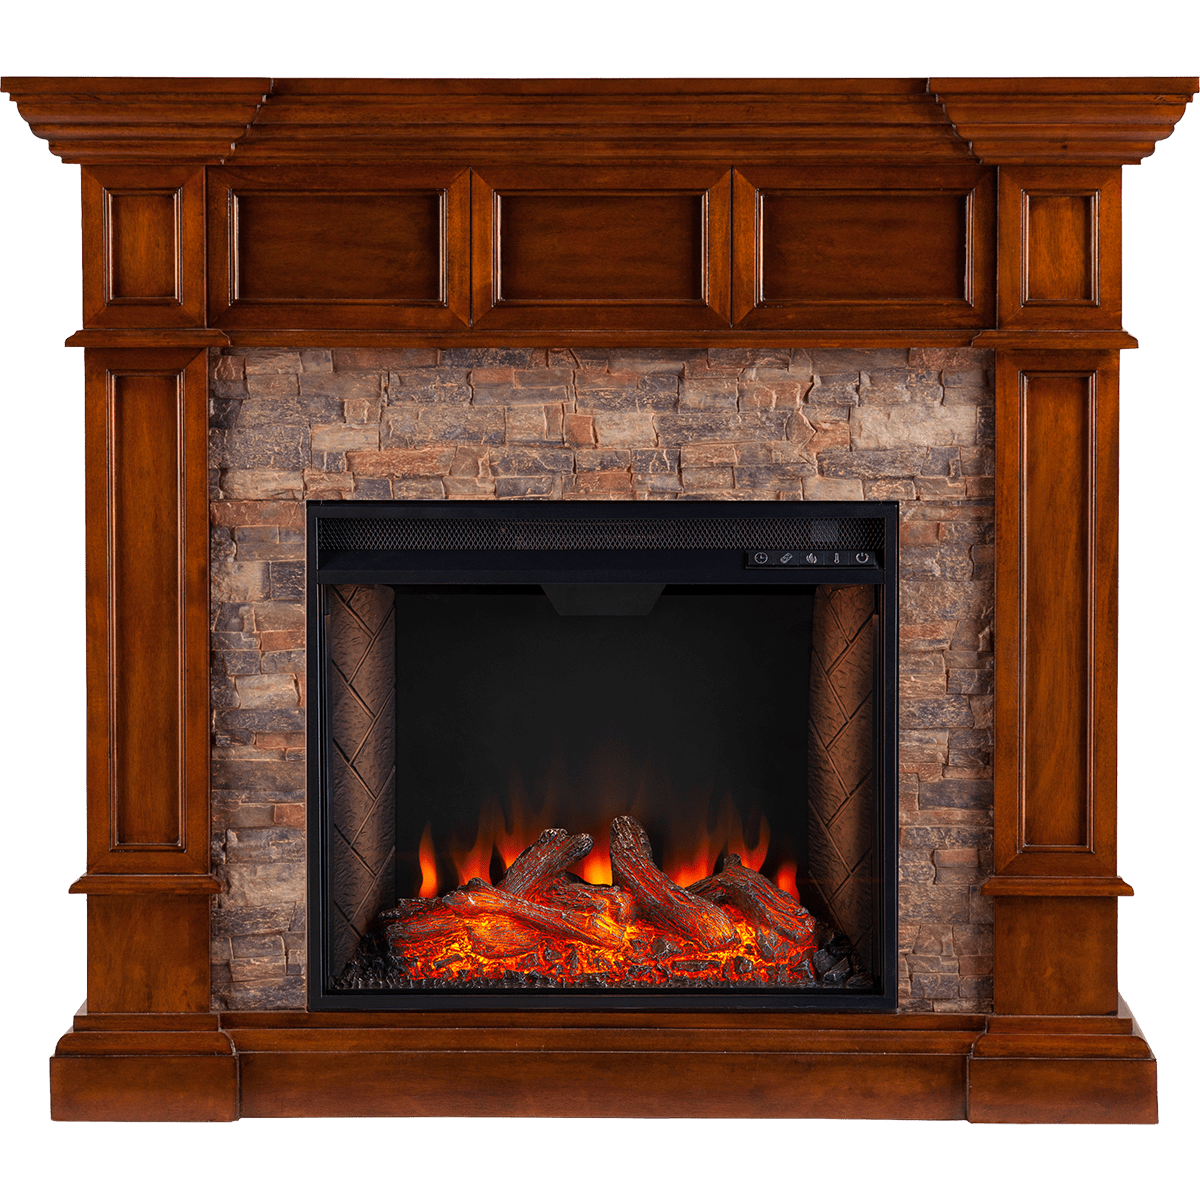 Rustic Wood Electric Fireplace Lovely southern Enterprises Merrimack Simulated Stone Convertible Electric Fireplace